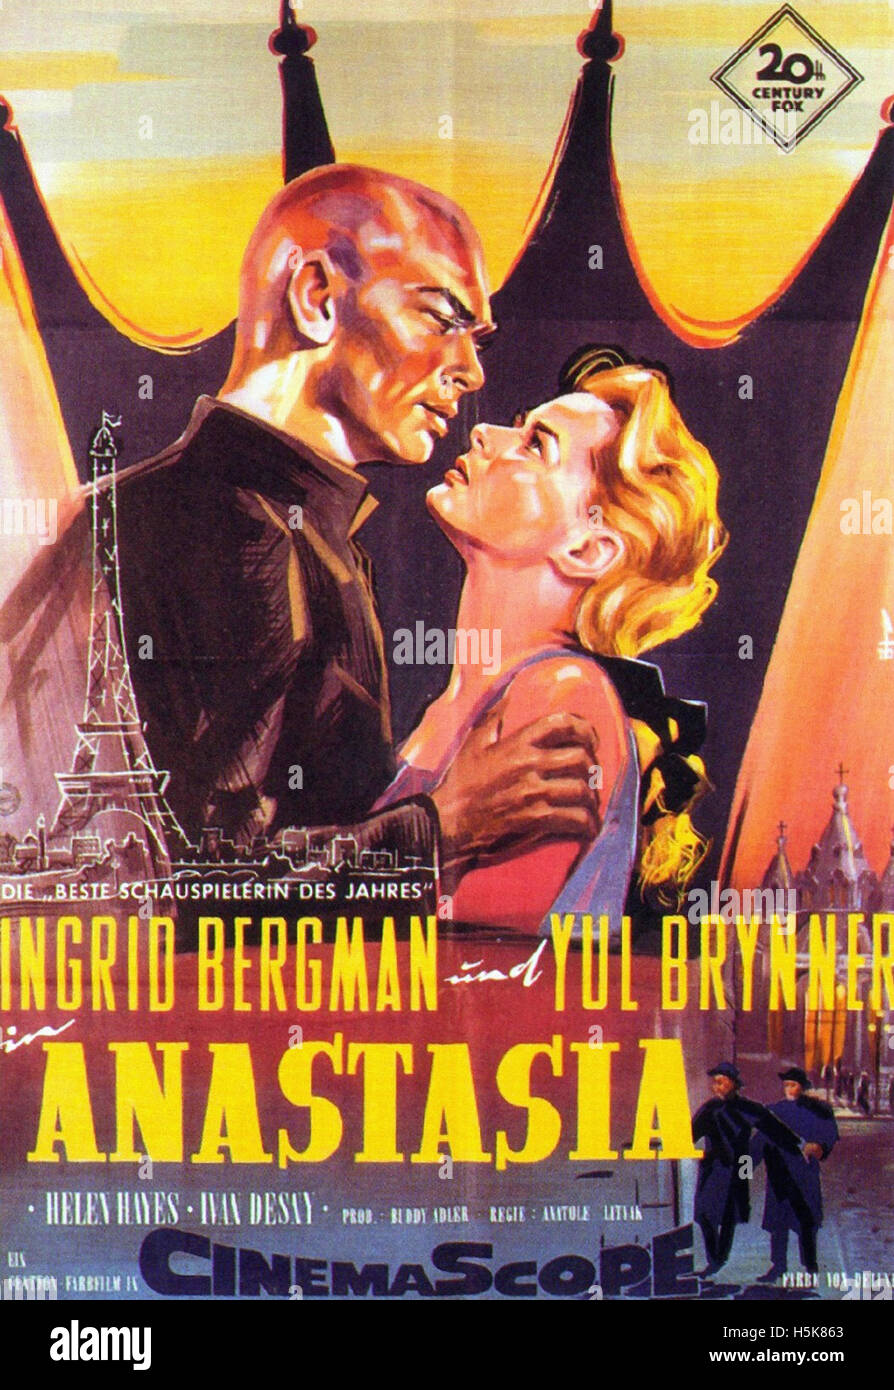 Anastasia - Movie Poster Banque D'Images